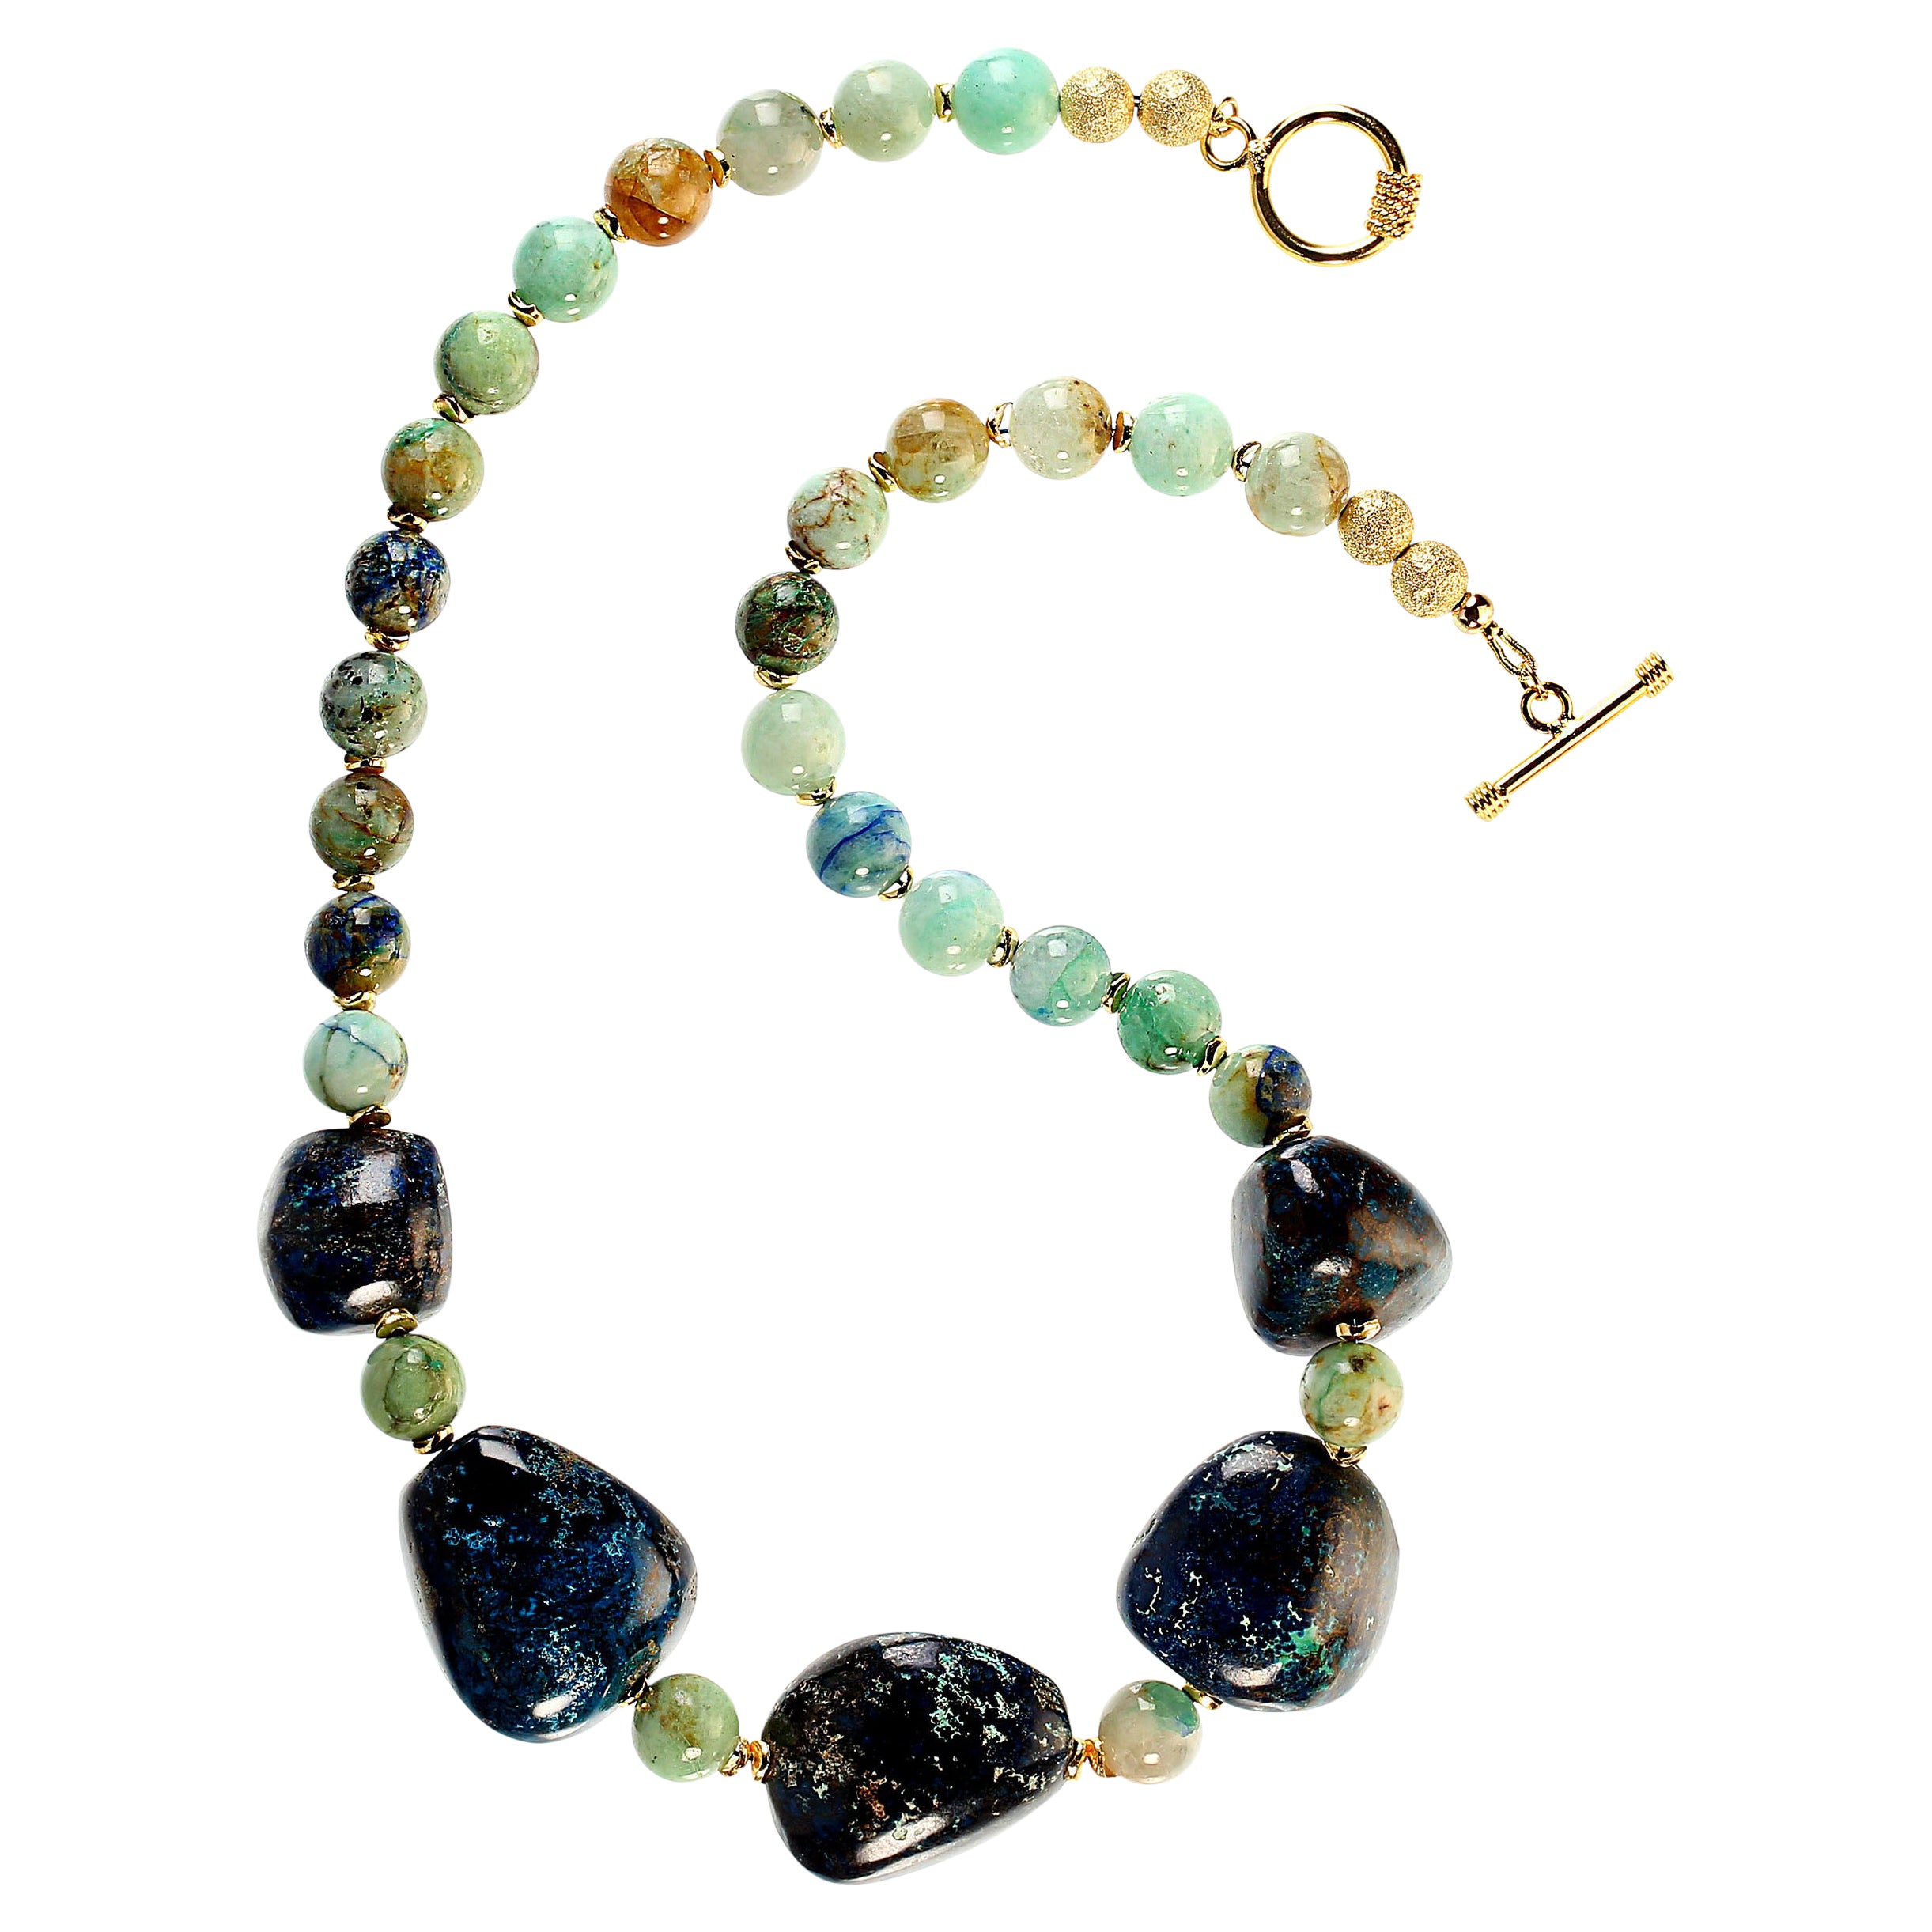 19.5 Inch Chrysocolla necklace with five gorgeous large smooth blue nuggets and greenish round beads all accented with goldy flutters.  This delightful and oh so wearable necklace is secured with a gold plate toggle clasp.  MN2425